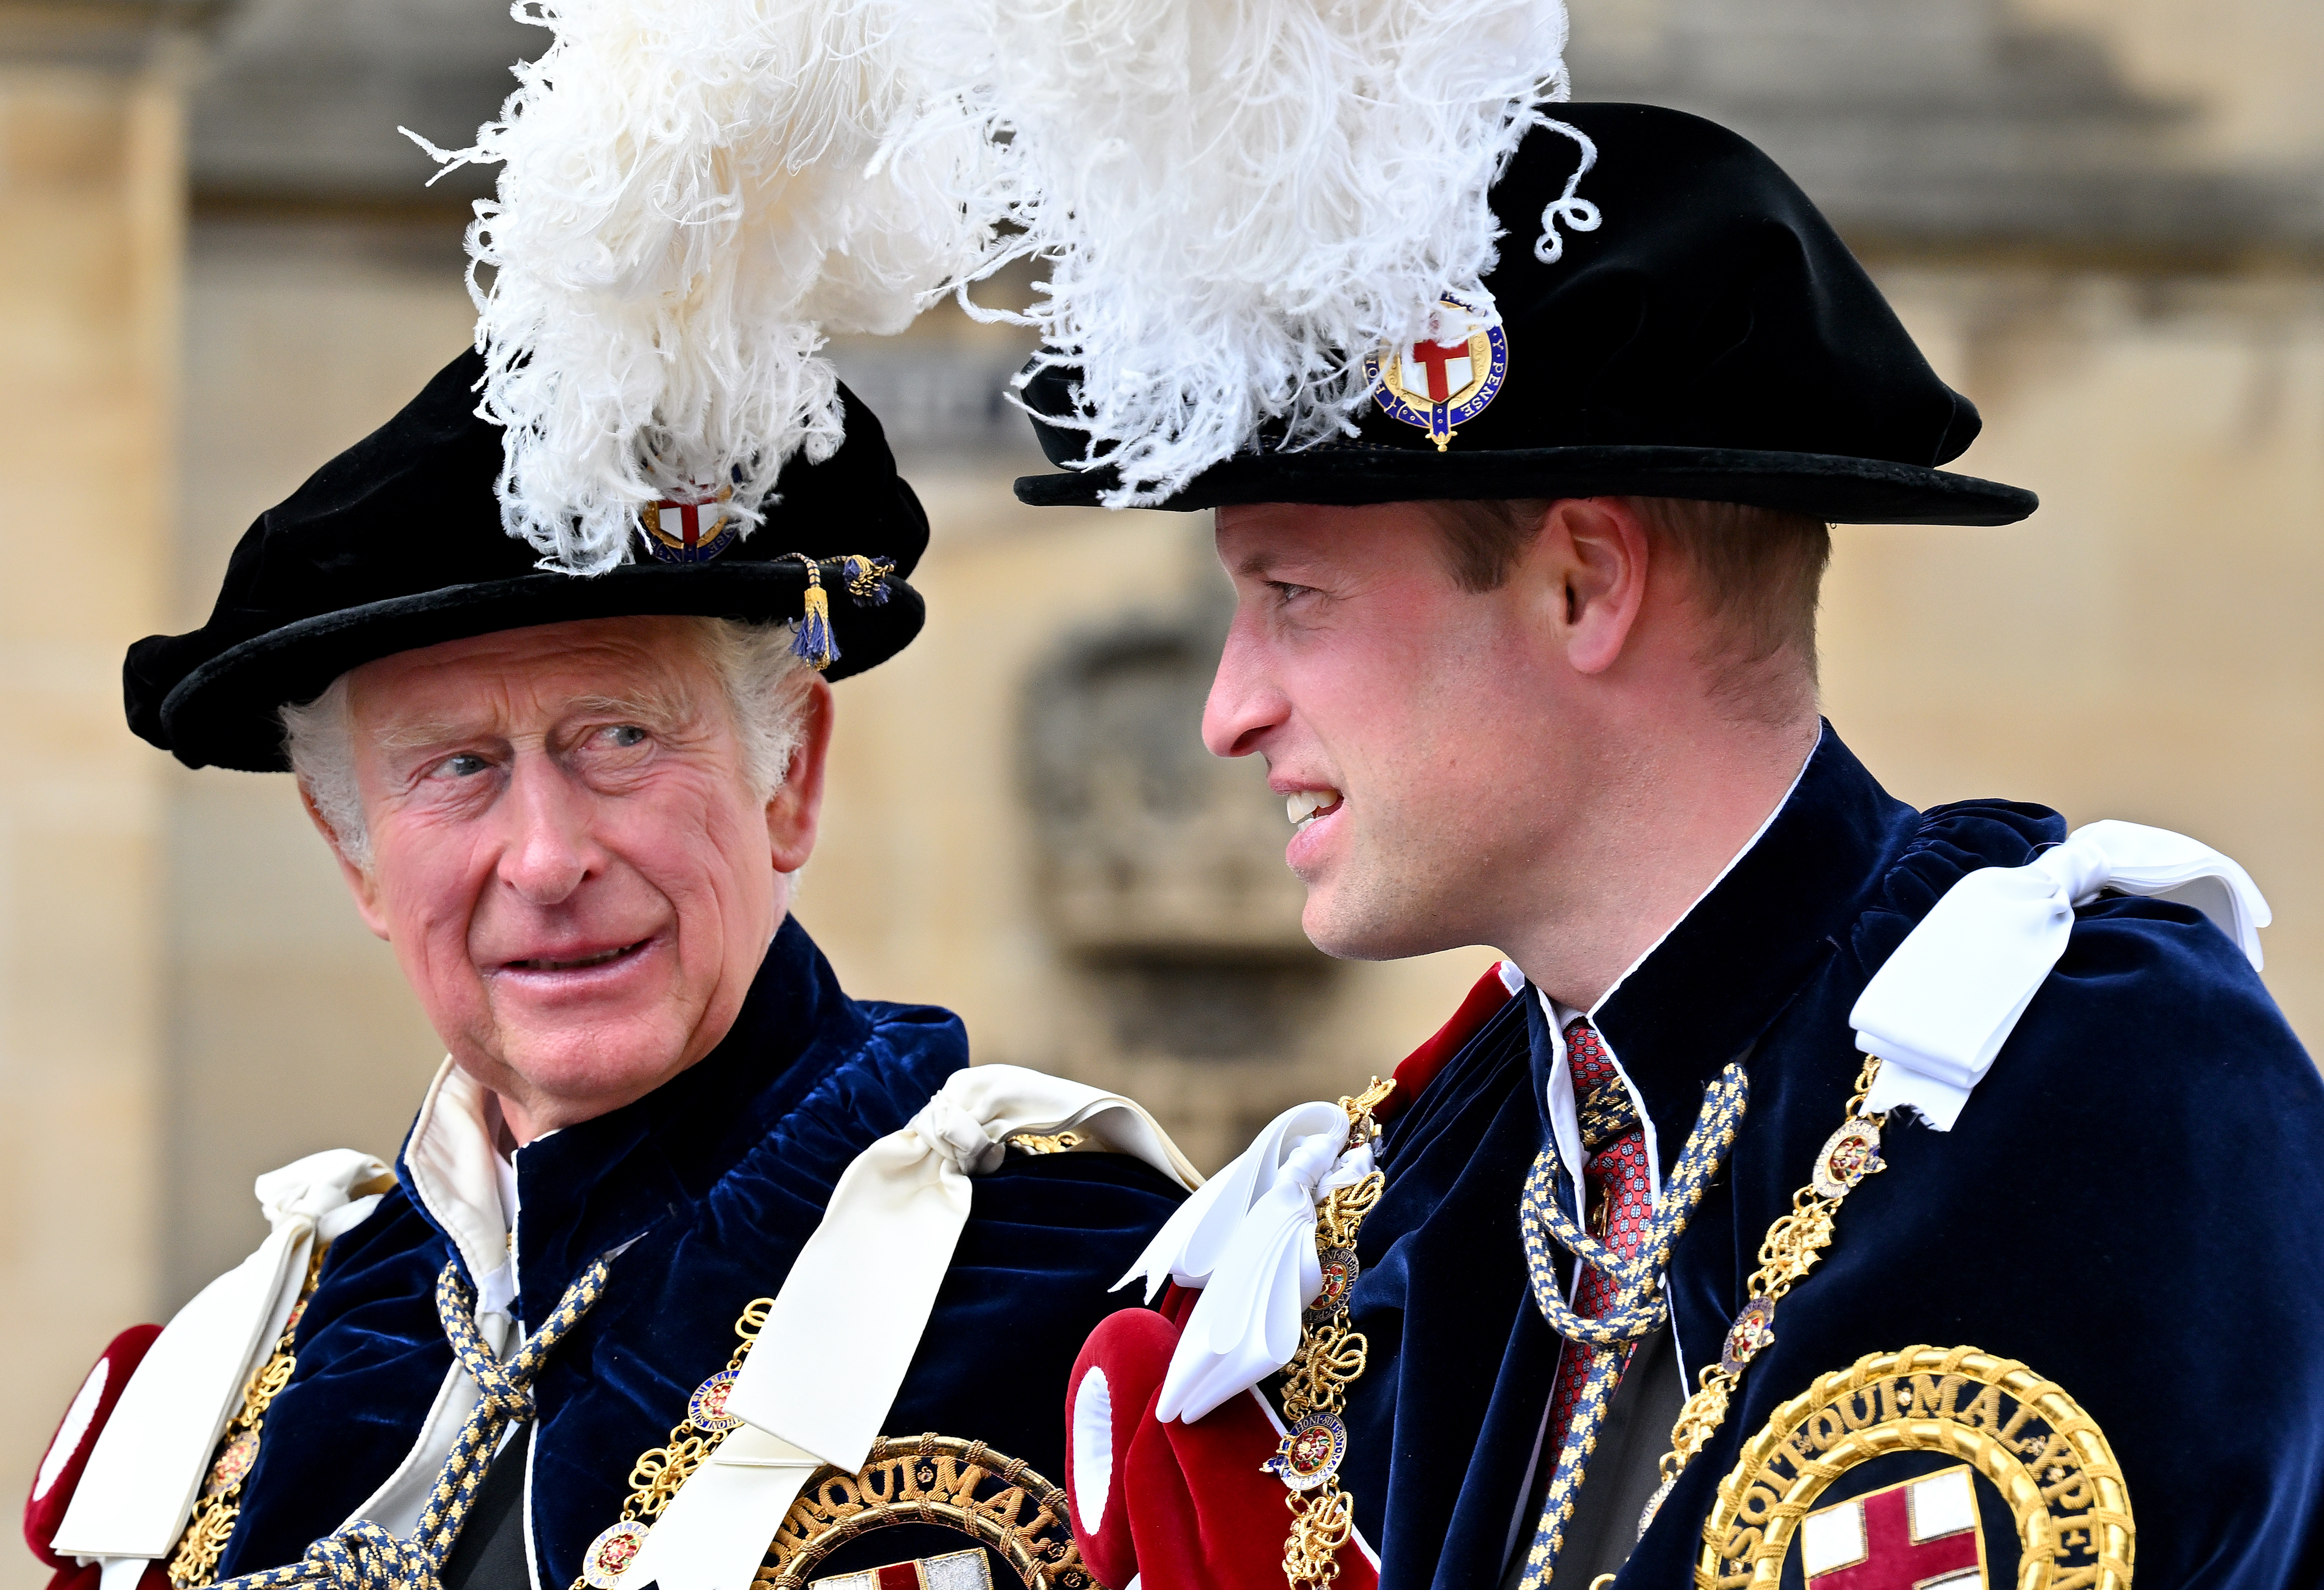 King Charles III and Prince William attend The Order of The Garter service at St George's Chapel, Windsor Castle on June 13, 2022 in Windsor, England | Source: Getty Images